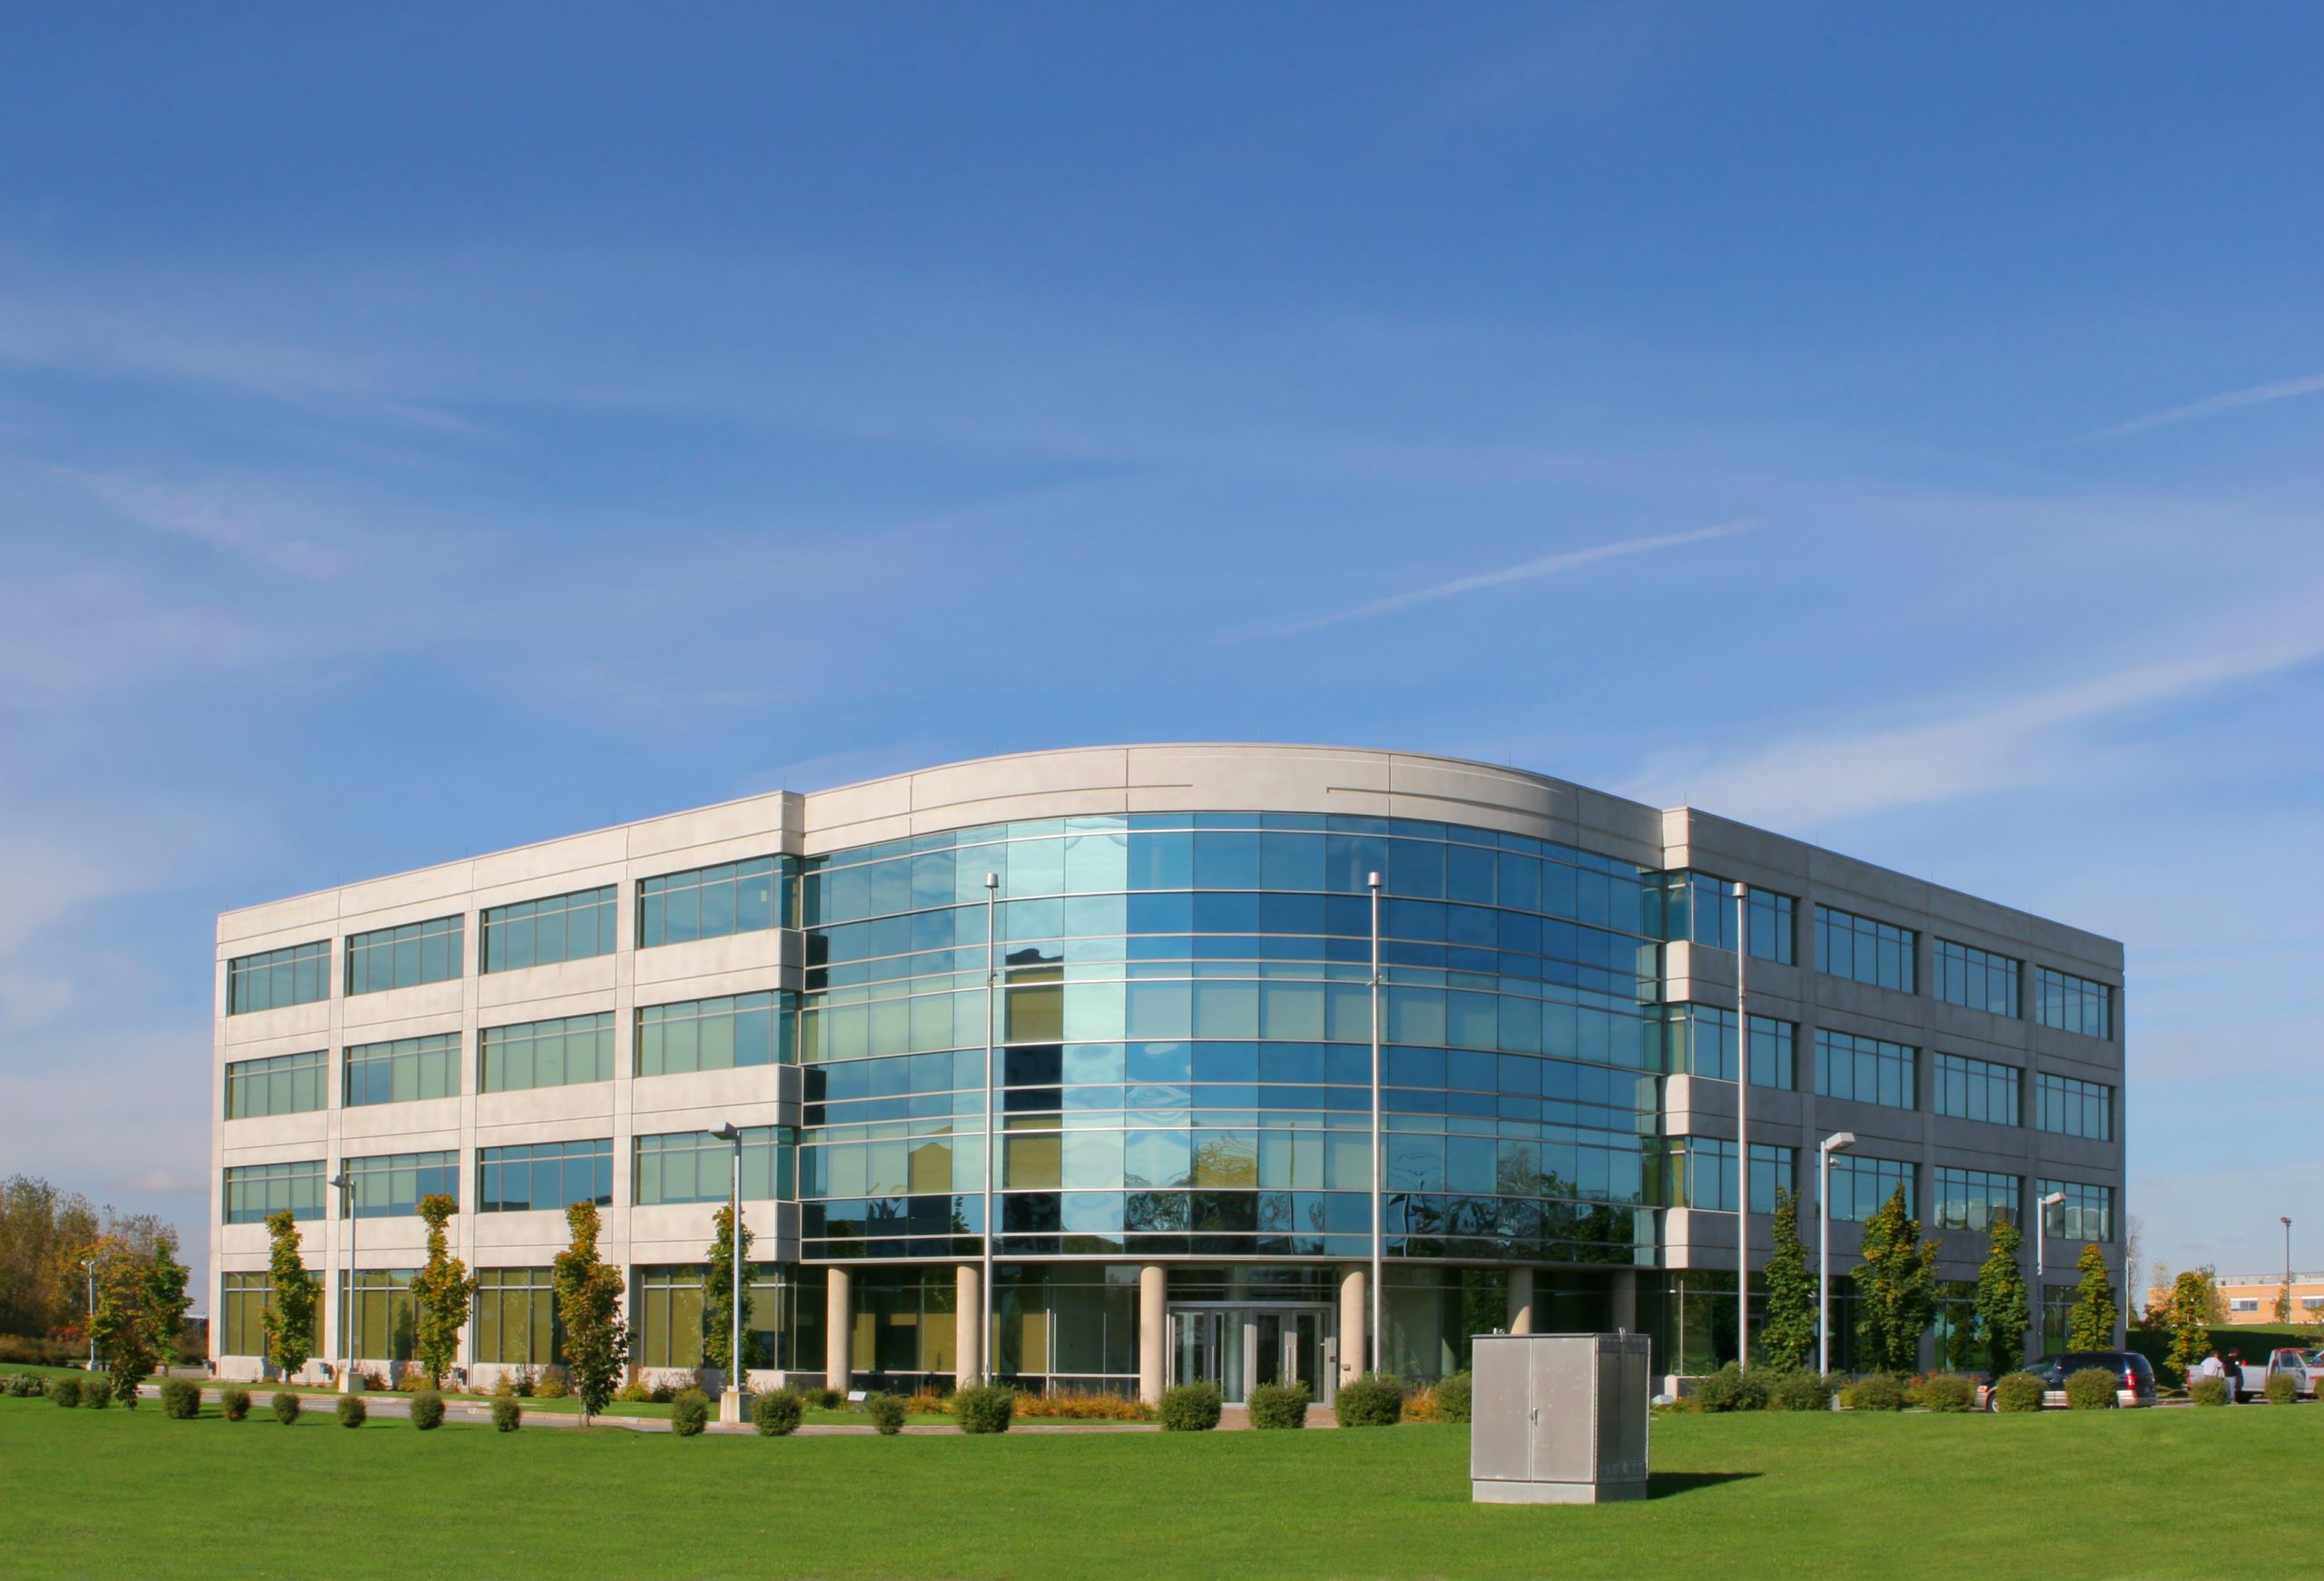 The image depicts a modern office building situated in a suburban market, surrounded by well-manicured landscaping. The building features a sleek exterior facade with large windows that reflect the surrounding greenery. A spacious parking lot is visible in front of the building, providing ample parking space for tenants and visitors. The location in the suburban market makes it an attractive investment opportunity for investors seeking stable returns and long-term growth potential in the commercial real estate sector. The building's strategic positioning and contemporary design make it an ideal choice for businesses looking for a professional and accessible workspace